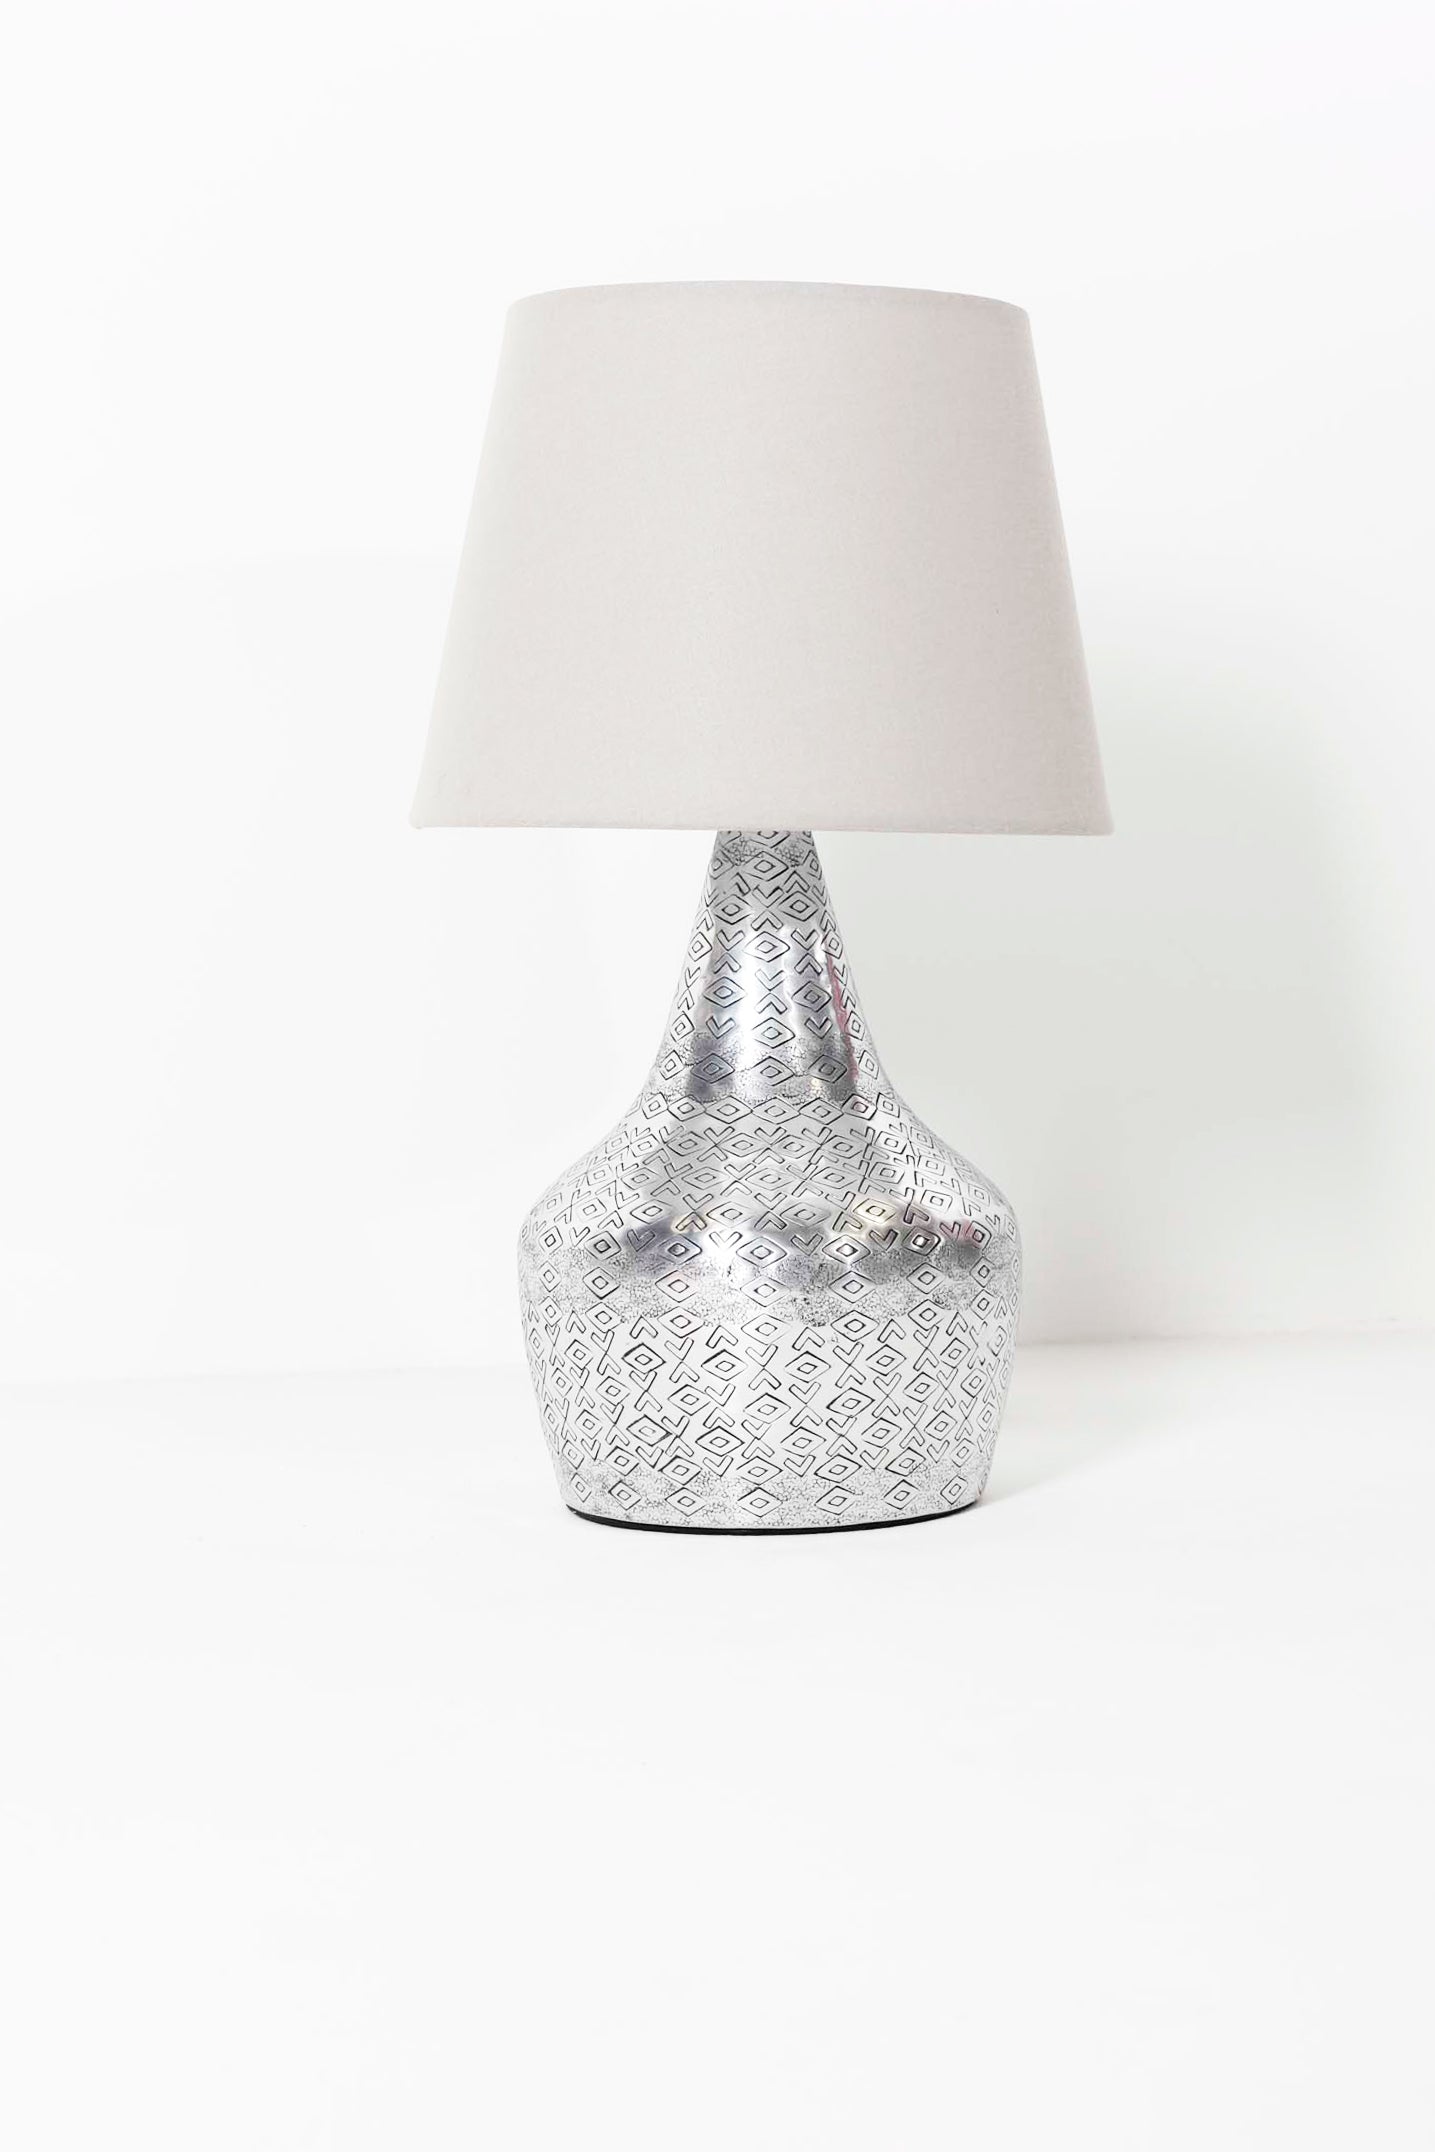 CHROME TABLE LAMP WITH EMBOSSED PATTERN AND BEIGE SHADE